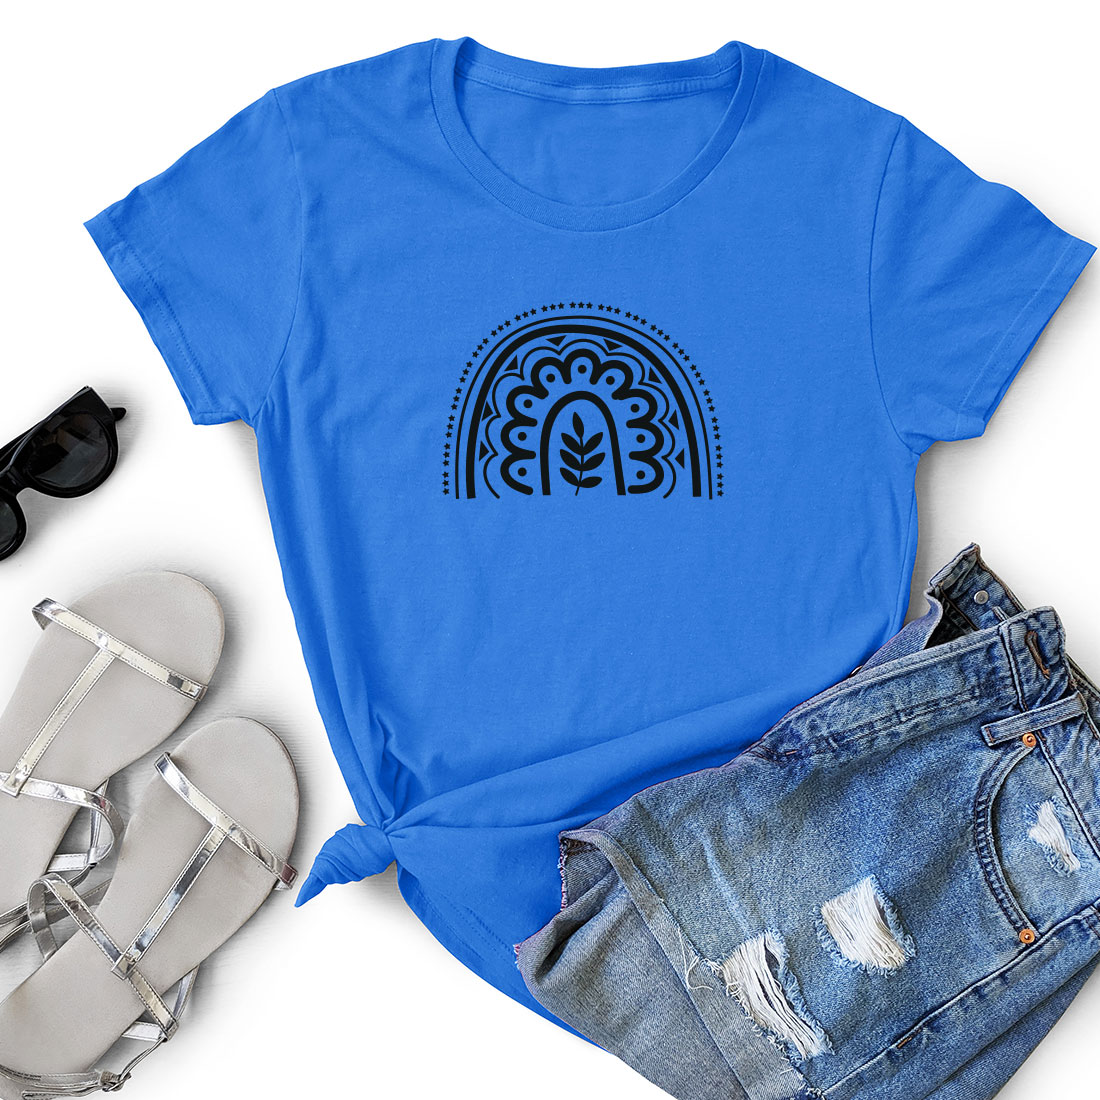 Blue t - shirt with a flower design on it.